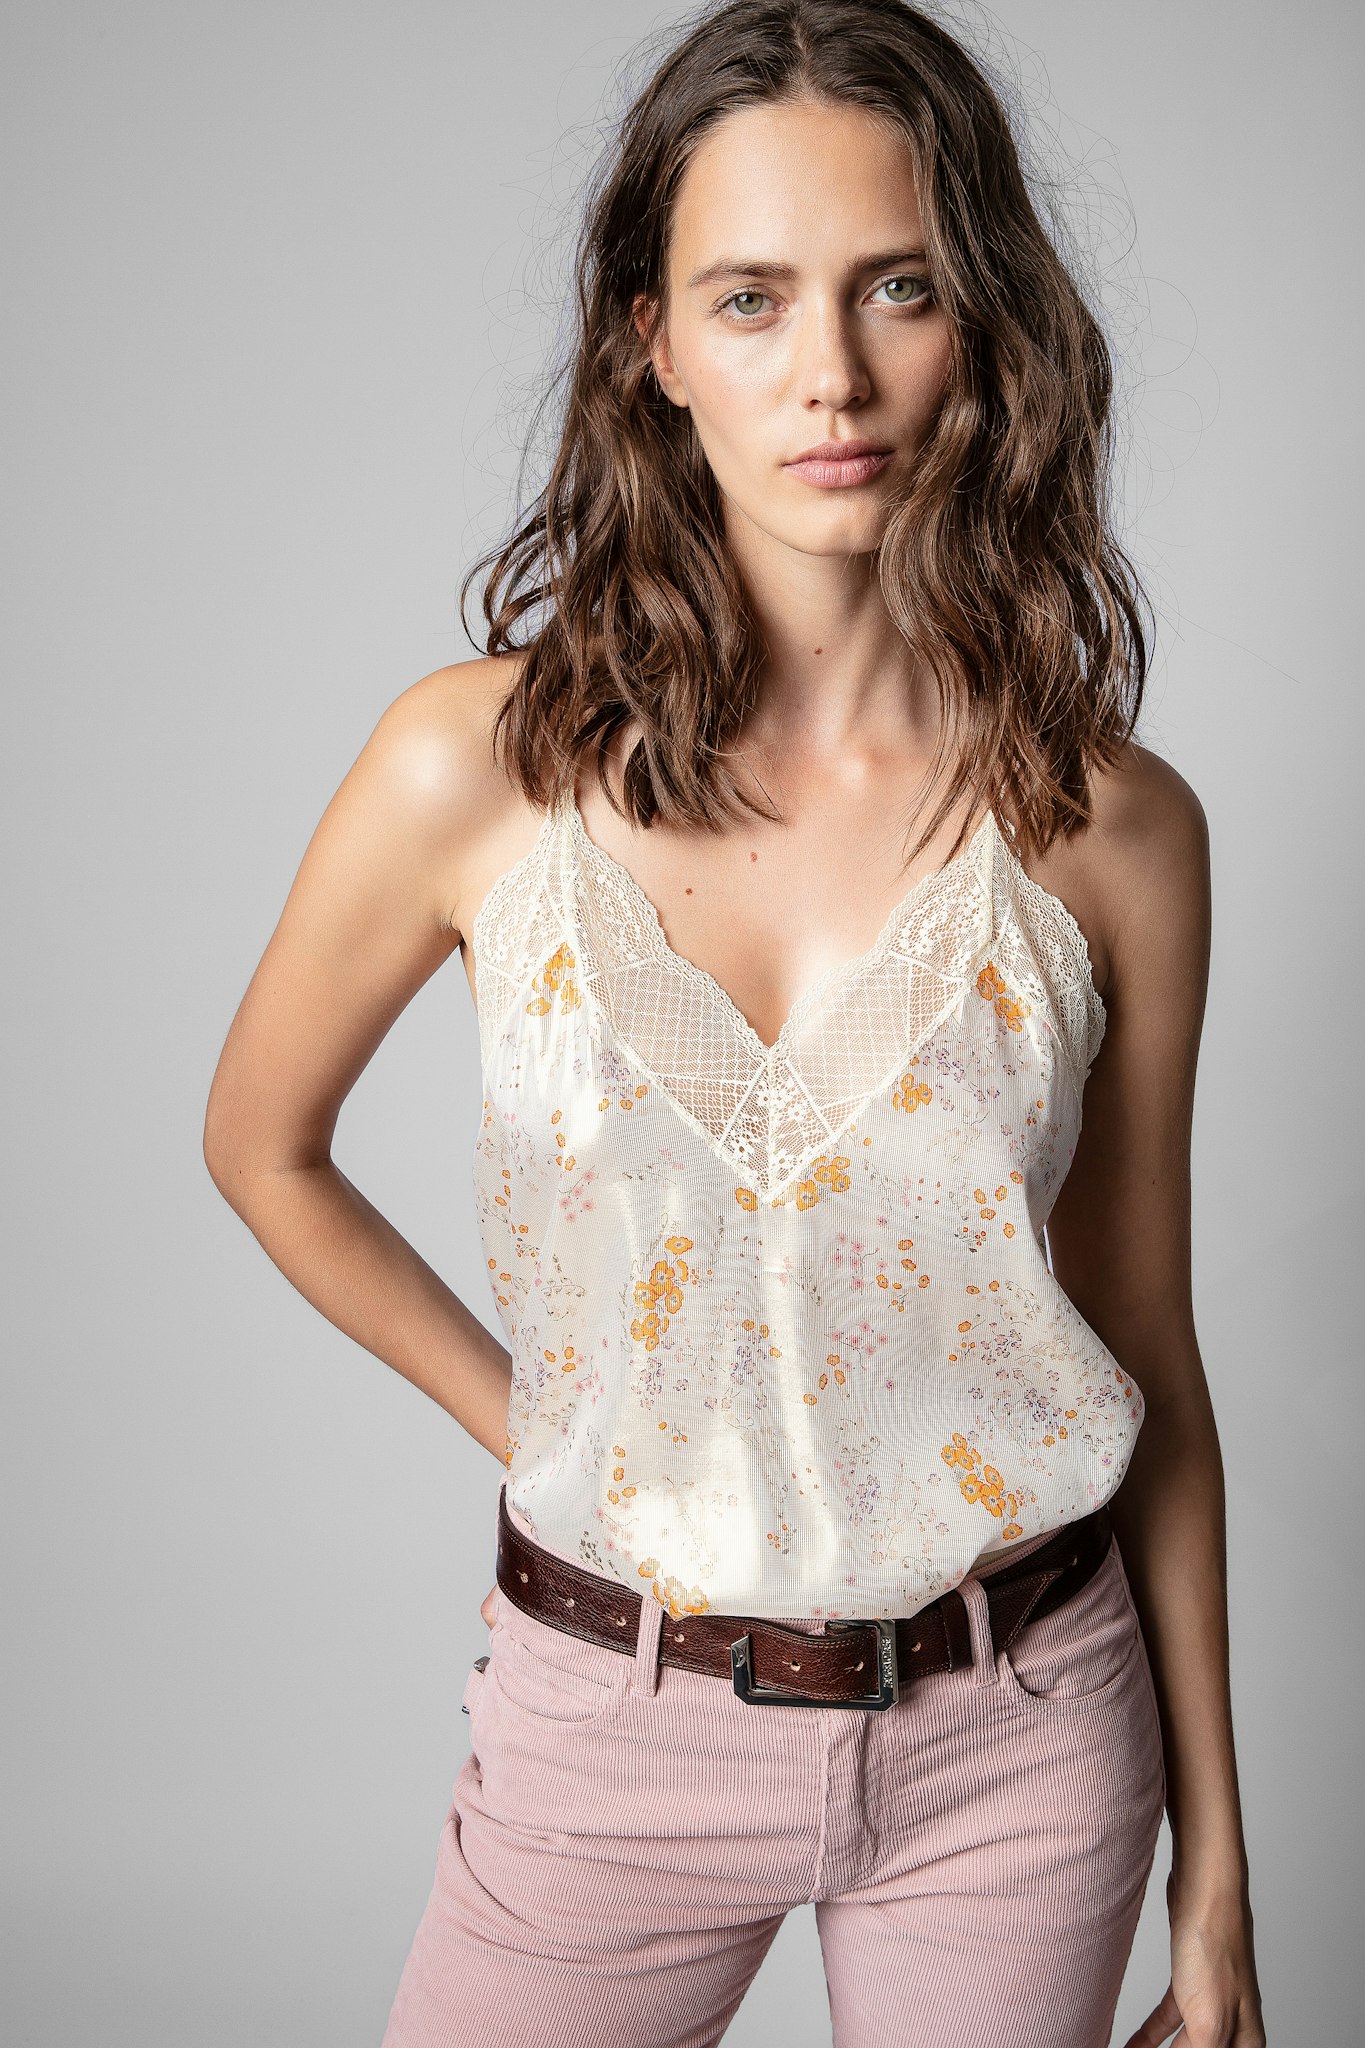 Christy Lame Camisole 